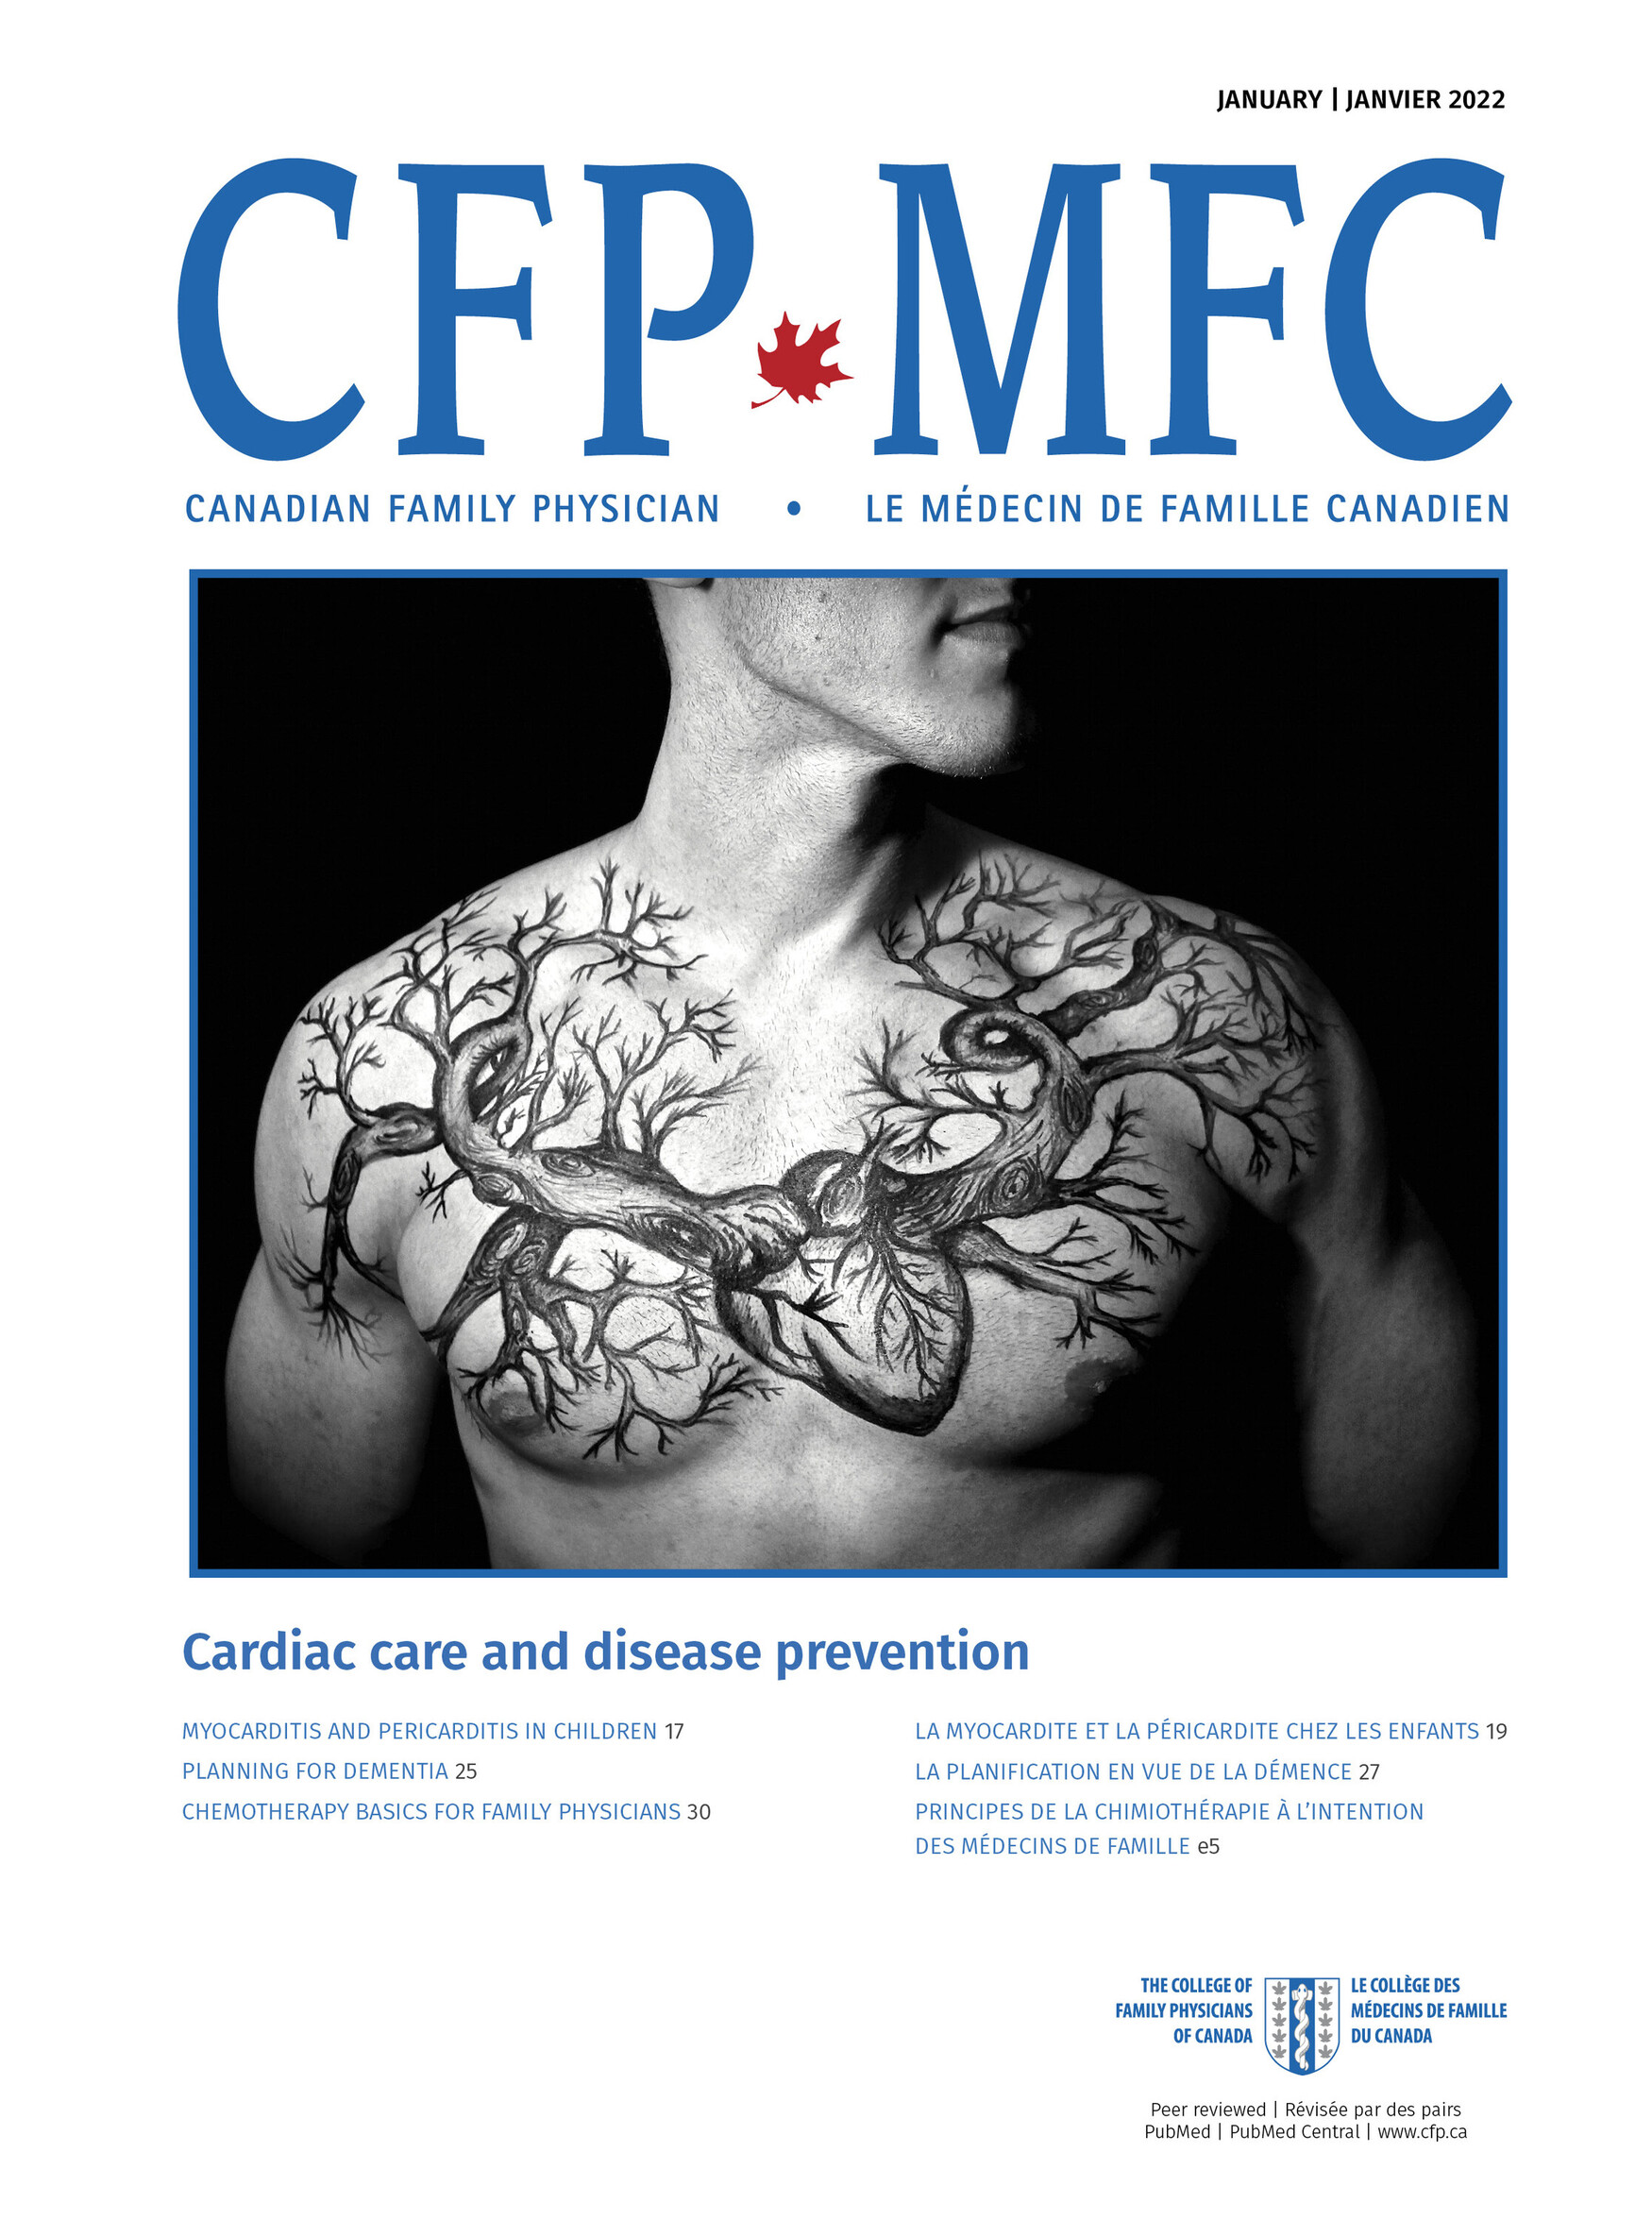 Canadian Family Physician Cover from January 2022, recognized by the National Magazine Awards